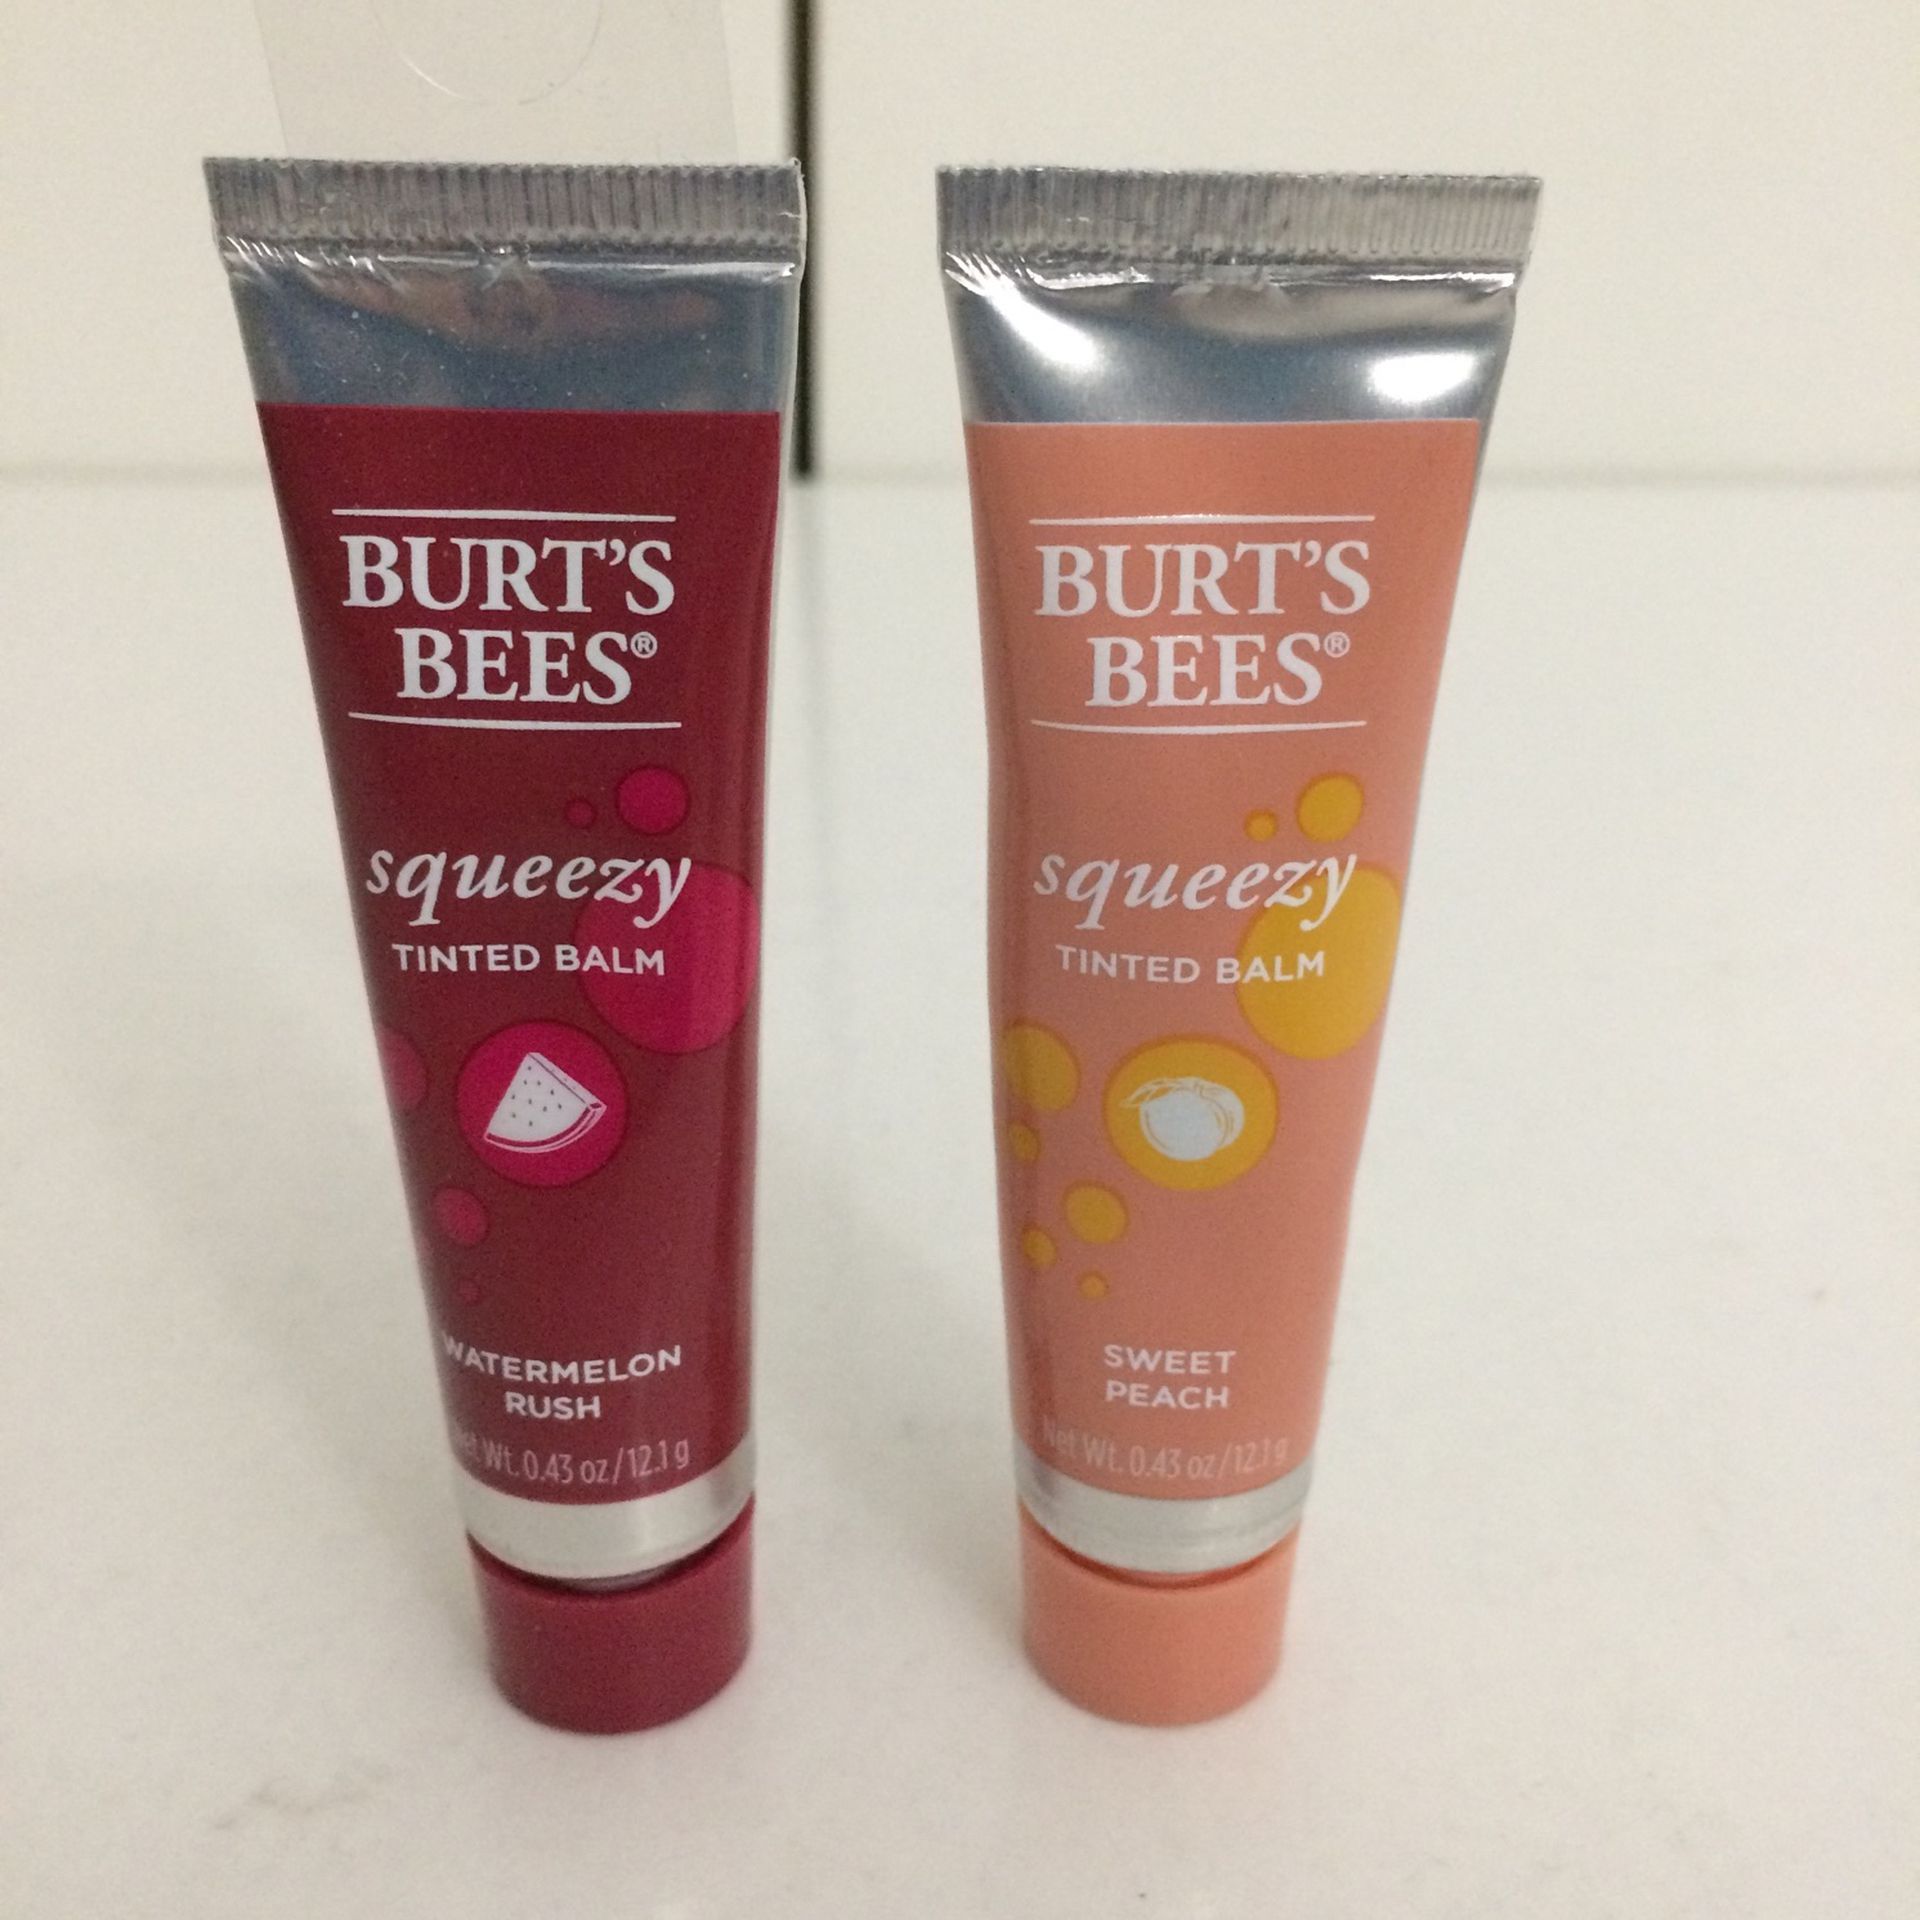 Burt’s Bees Squeezy Tinted Balm